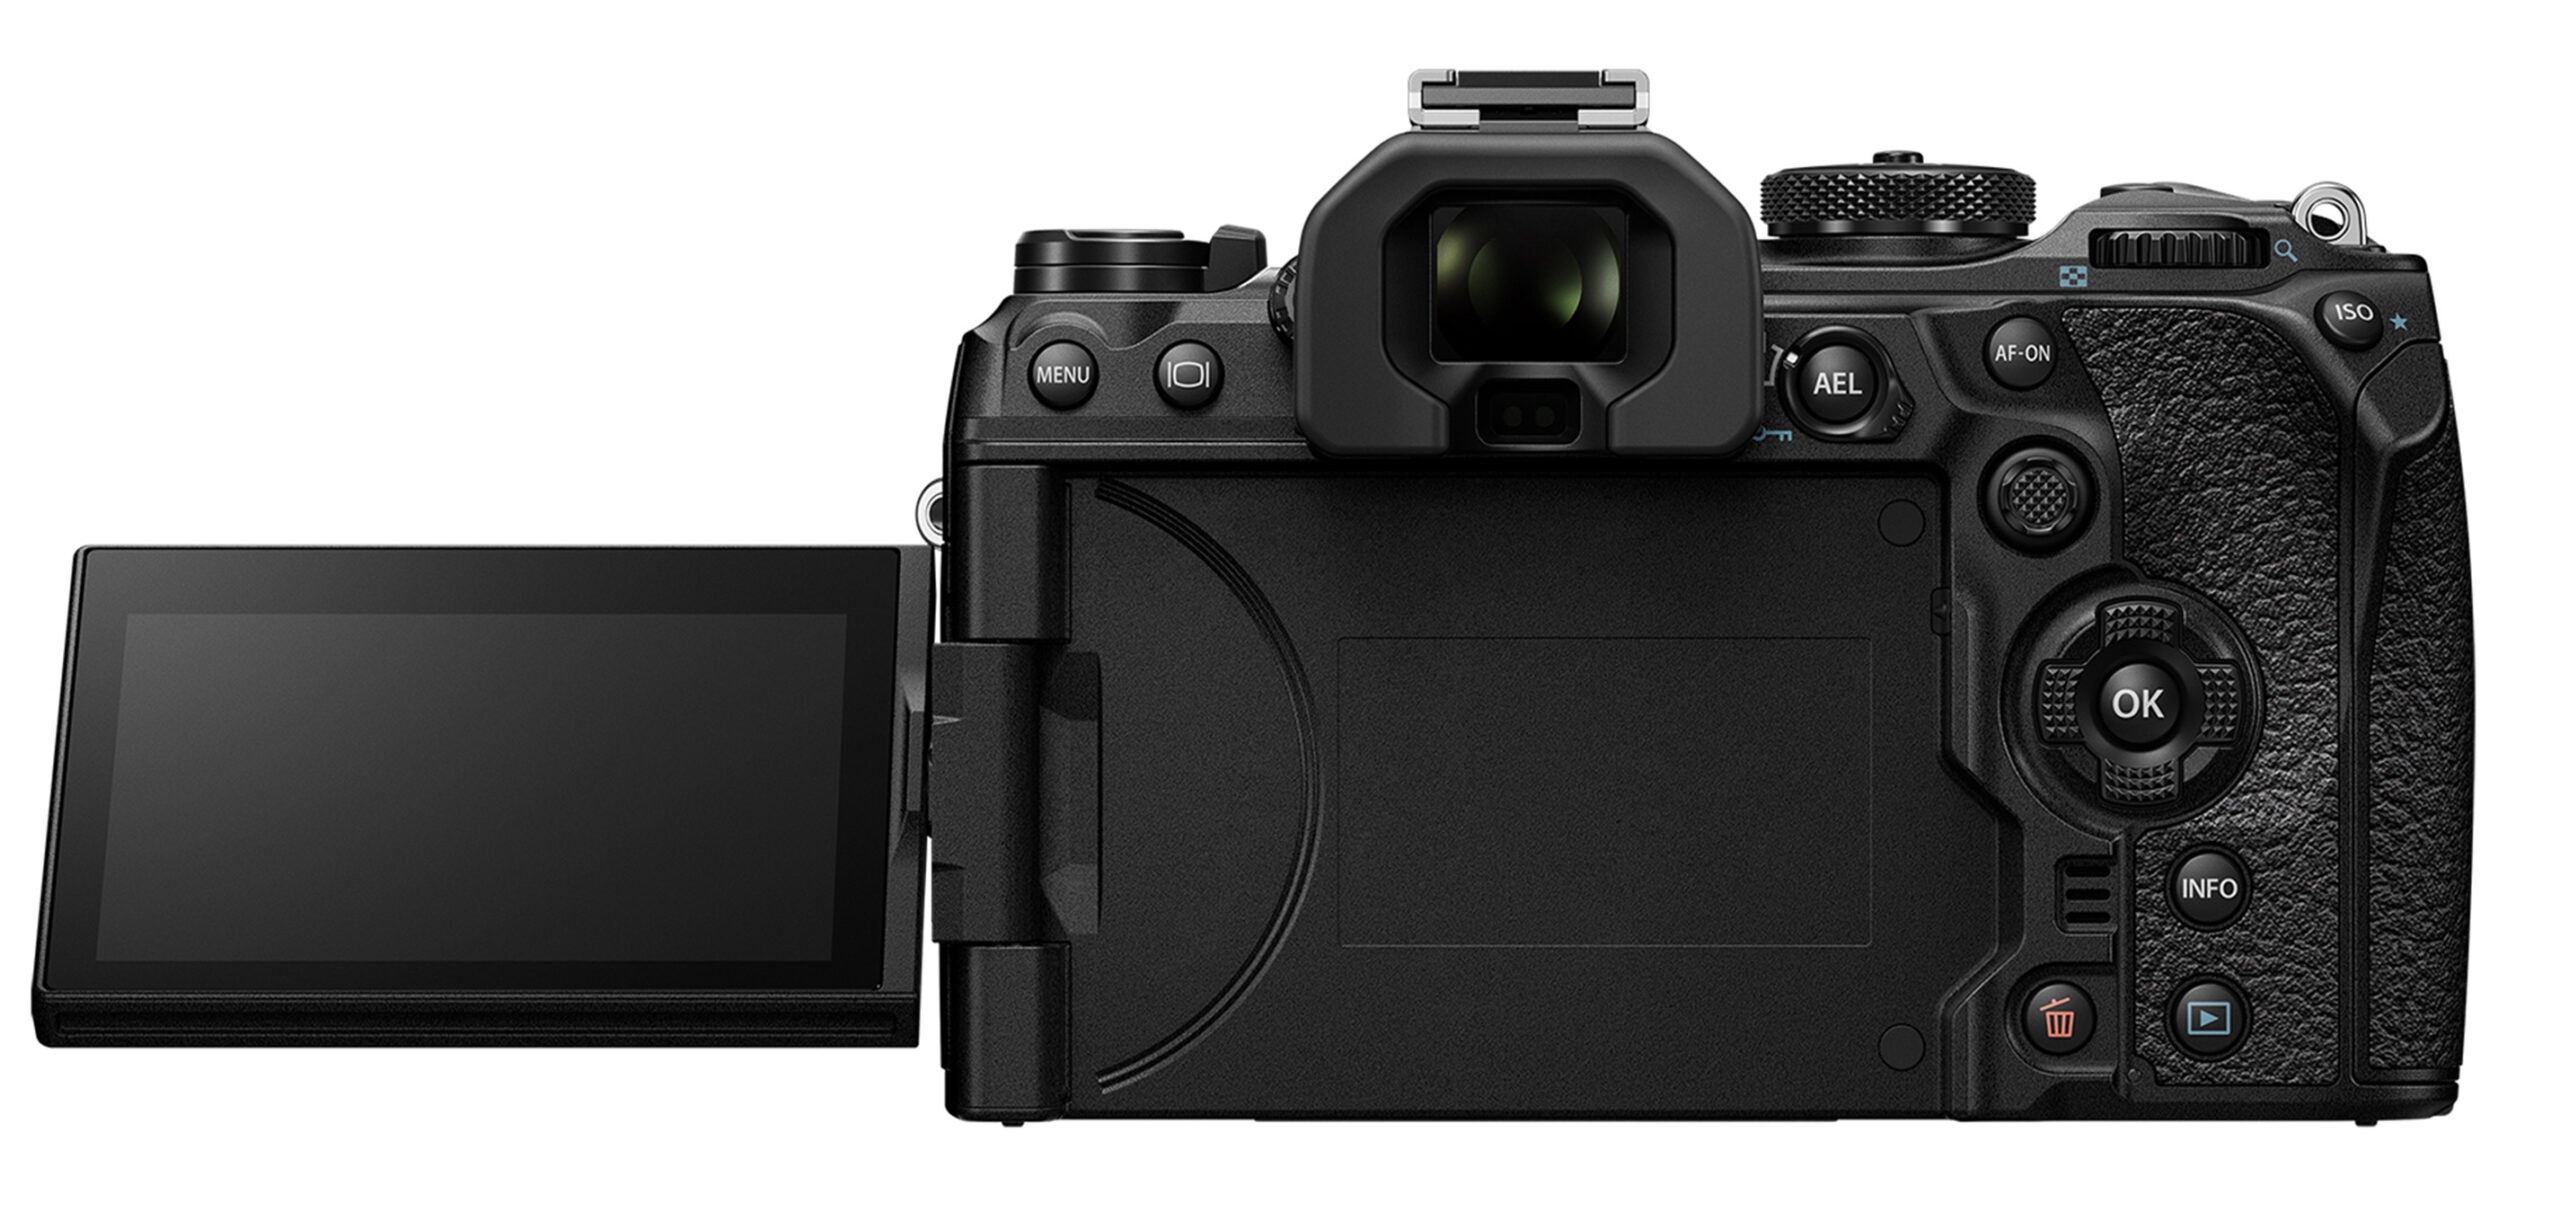 The new OM System OM-1 flagship Micro Four Thirds camera from OM Digital Solutions Corporation.